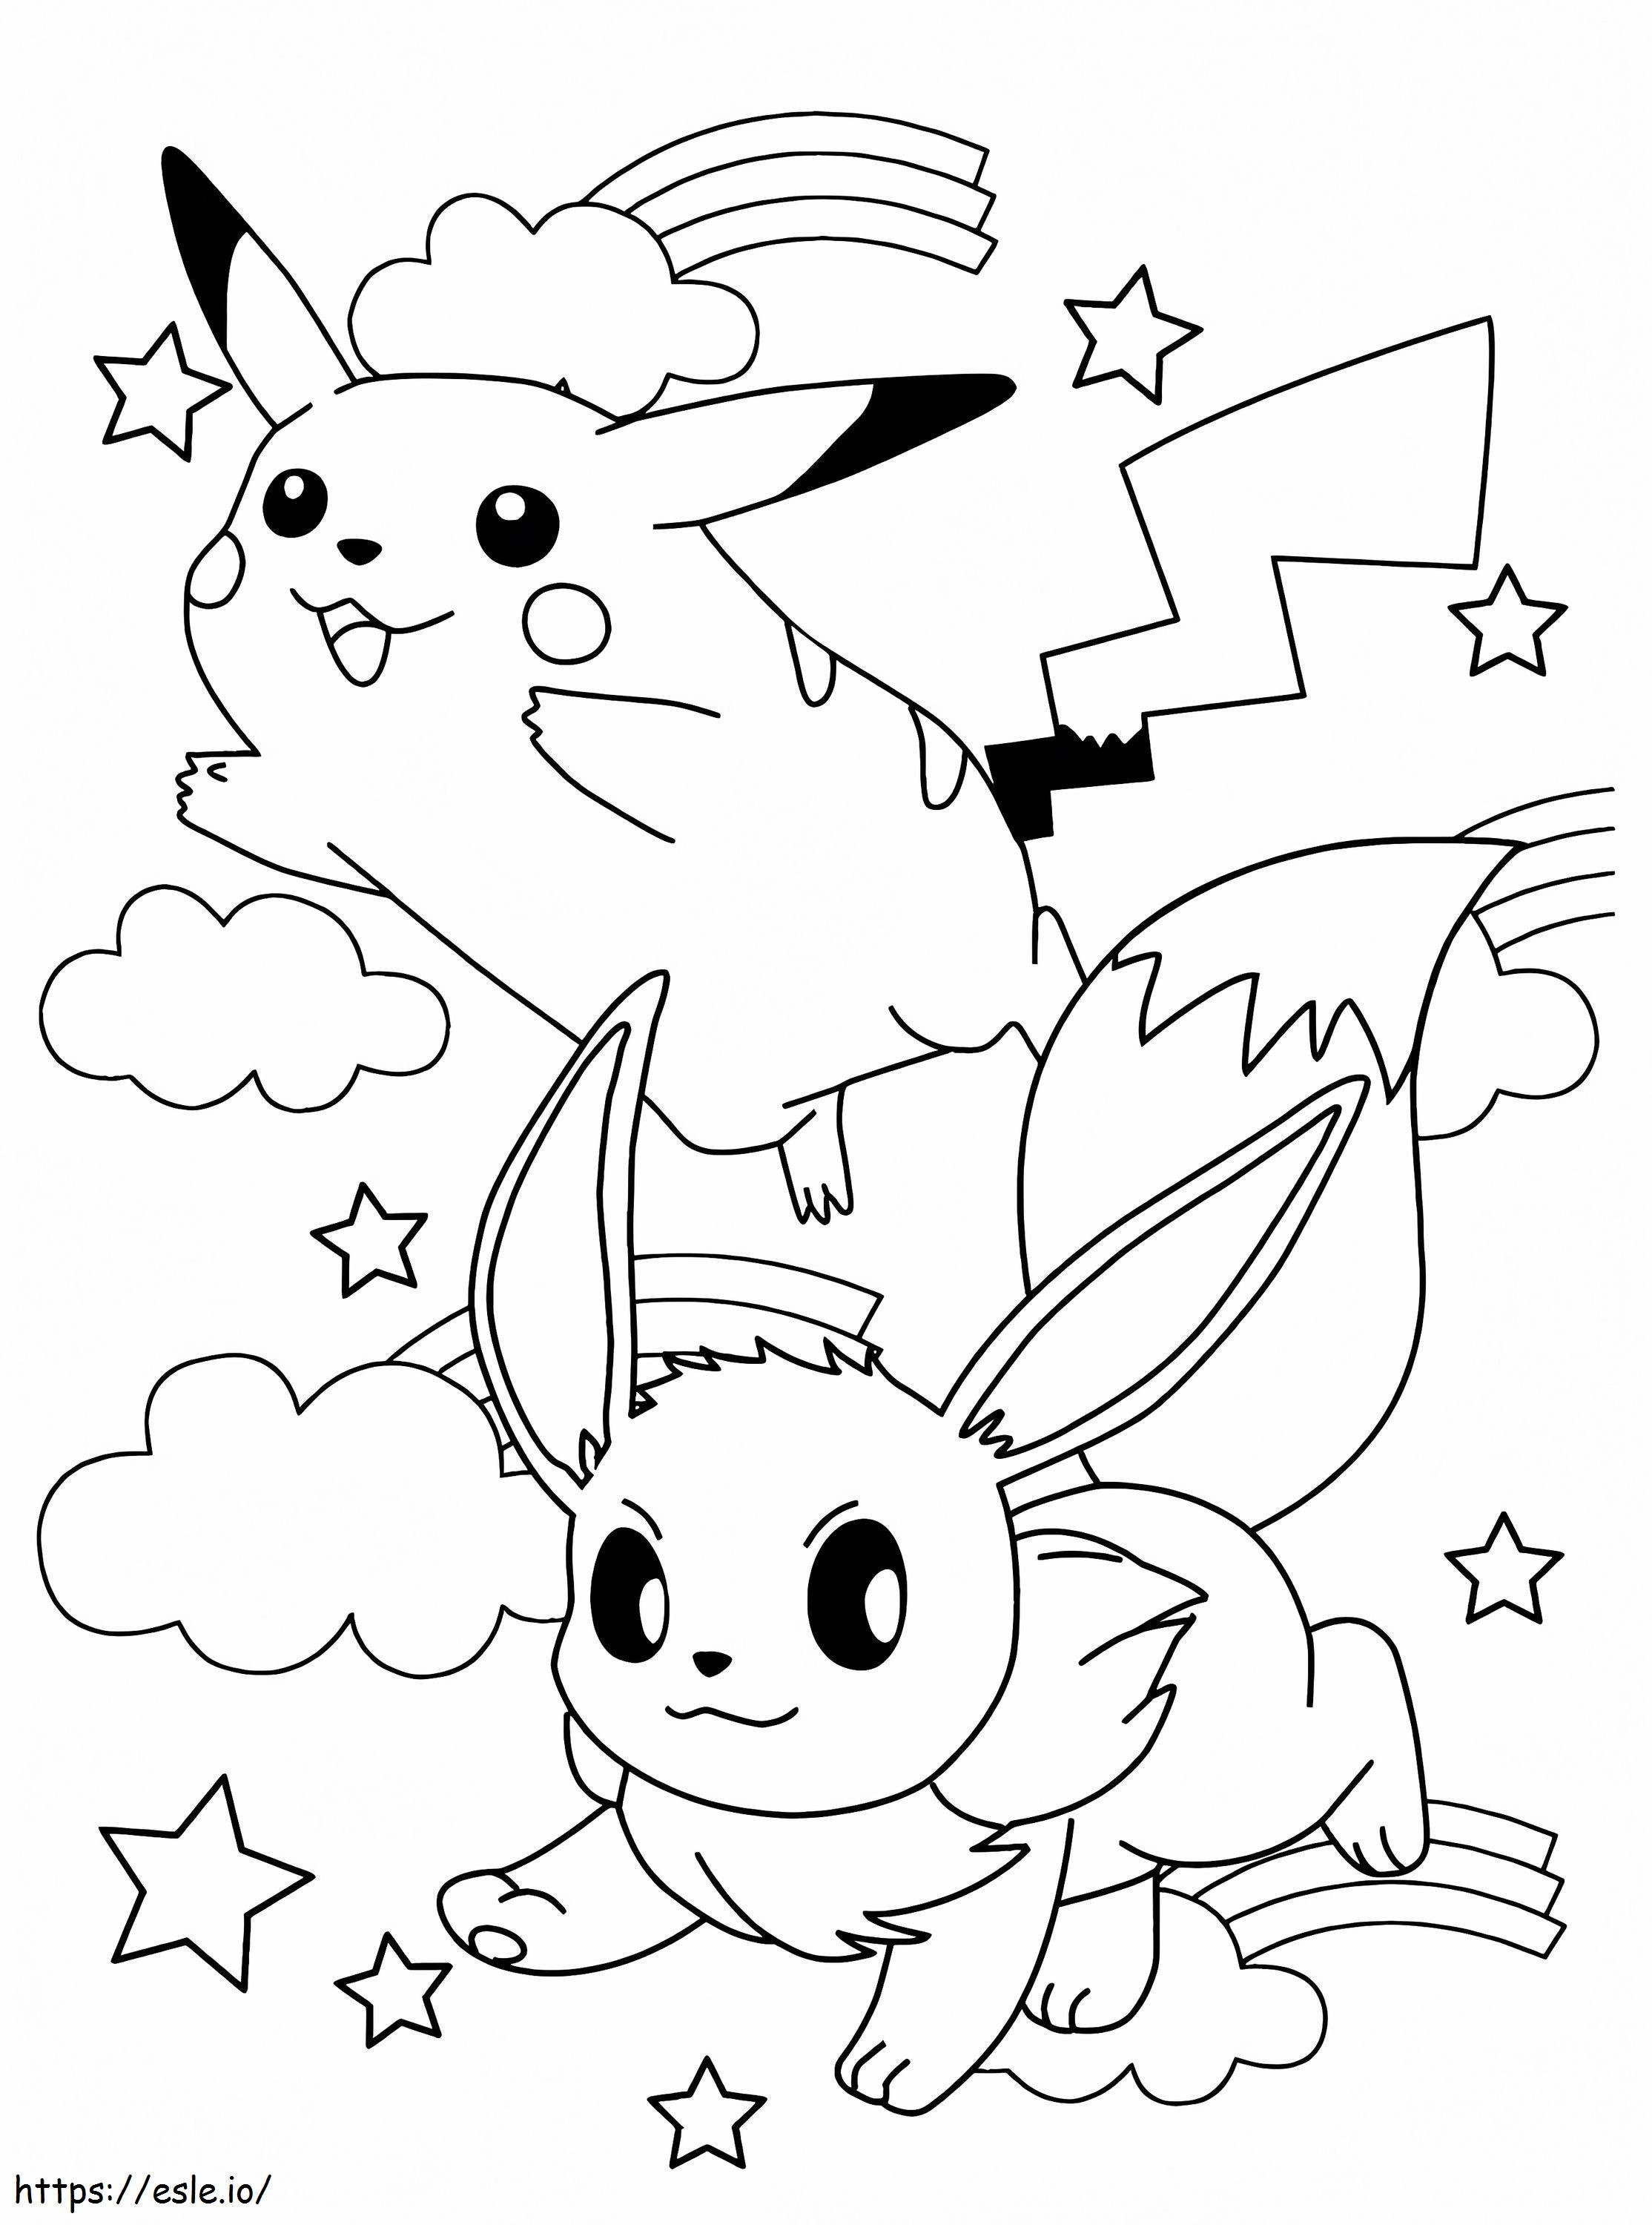 Coloring Eevee Pokemon Home For Color Free Printable Pikachu Pictures To Print And Colour Images Colouring Book Pdf Sheets Characters Charizard Sheet Pics Cards Legendary Scaled 1 coloring page